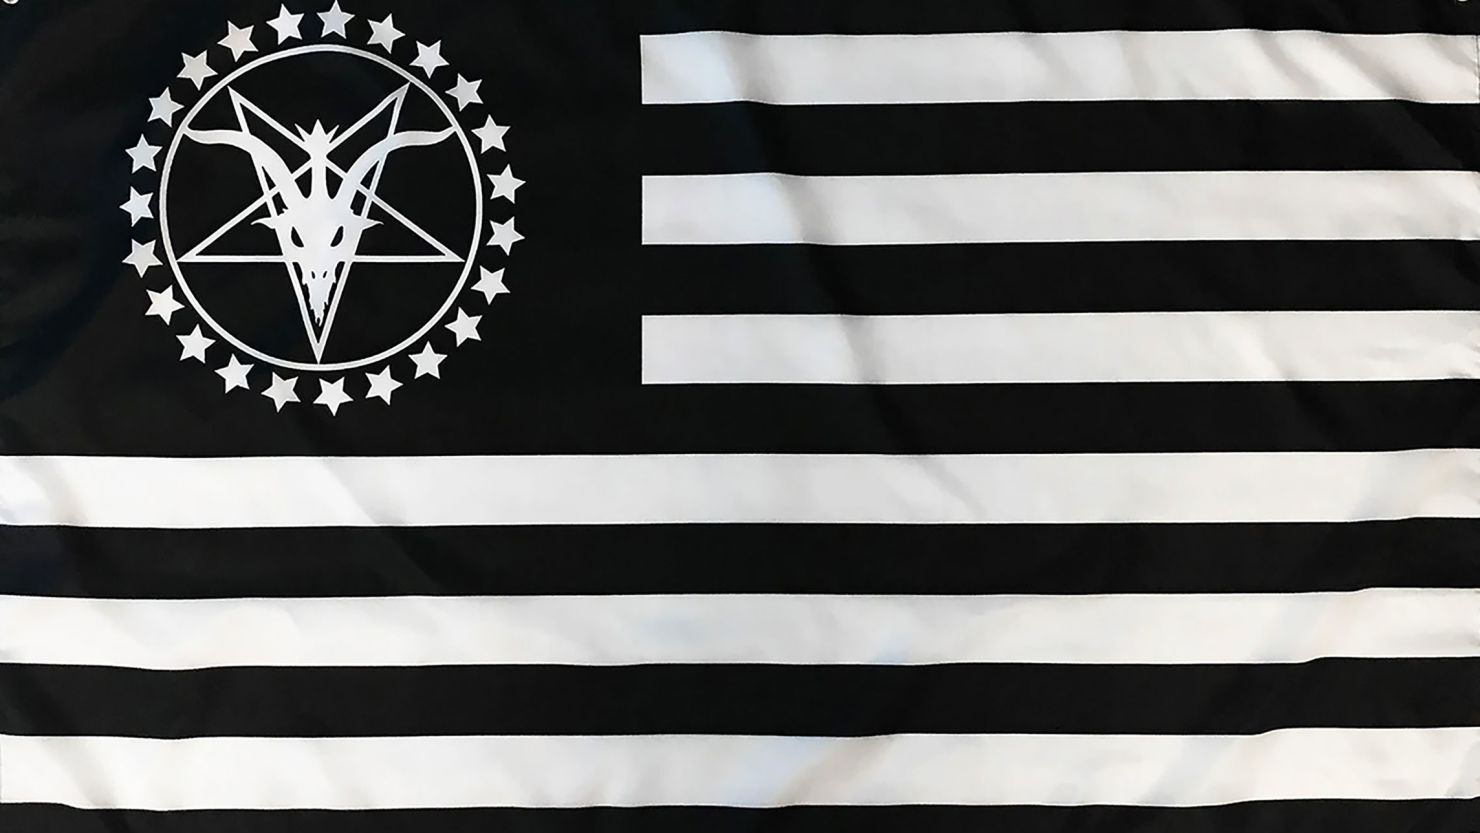 Pictured is one of a number of flags The Satanic Temple sells on its website. The Satanic Temple is requesting that Boston fly one of its flags following a Supreme Court ruling this week. Its request did not specify which it would use.